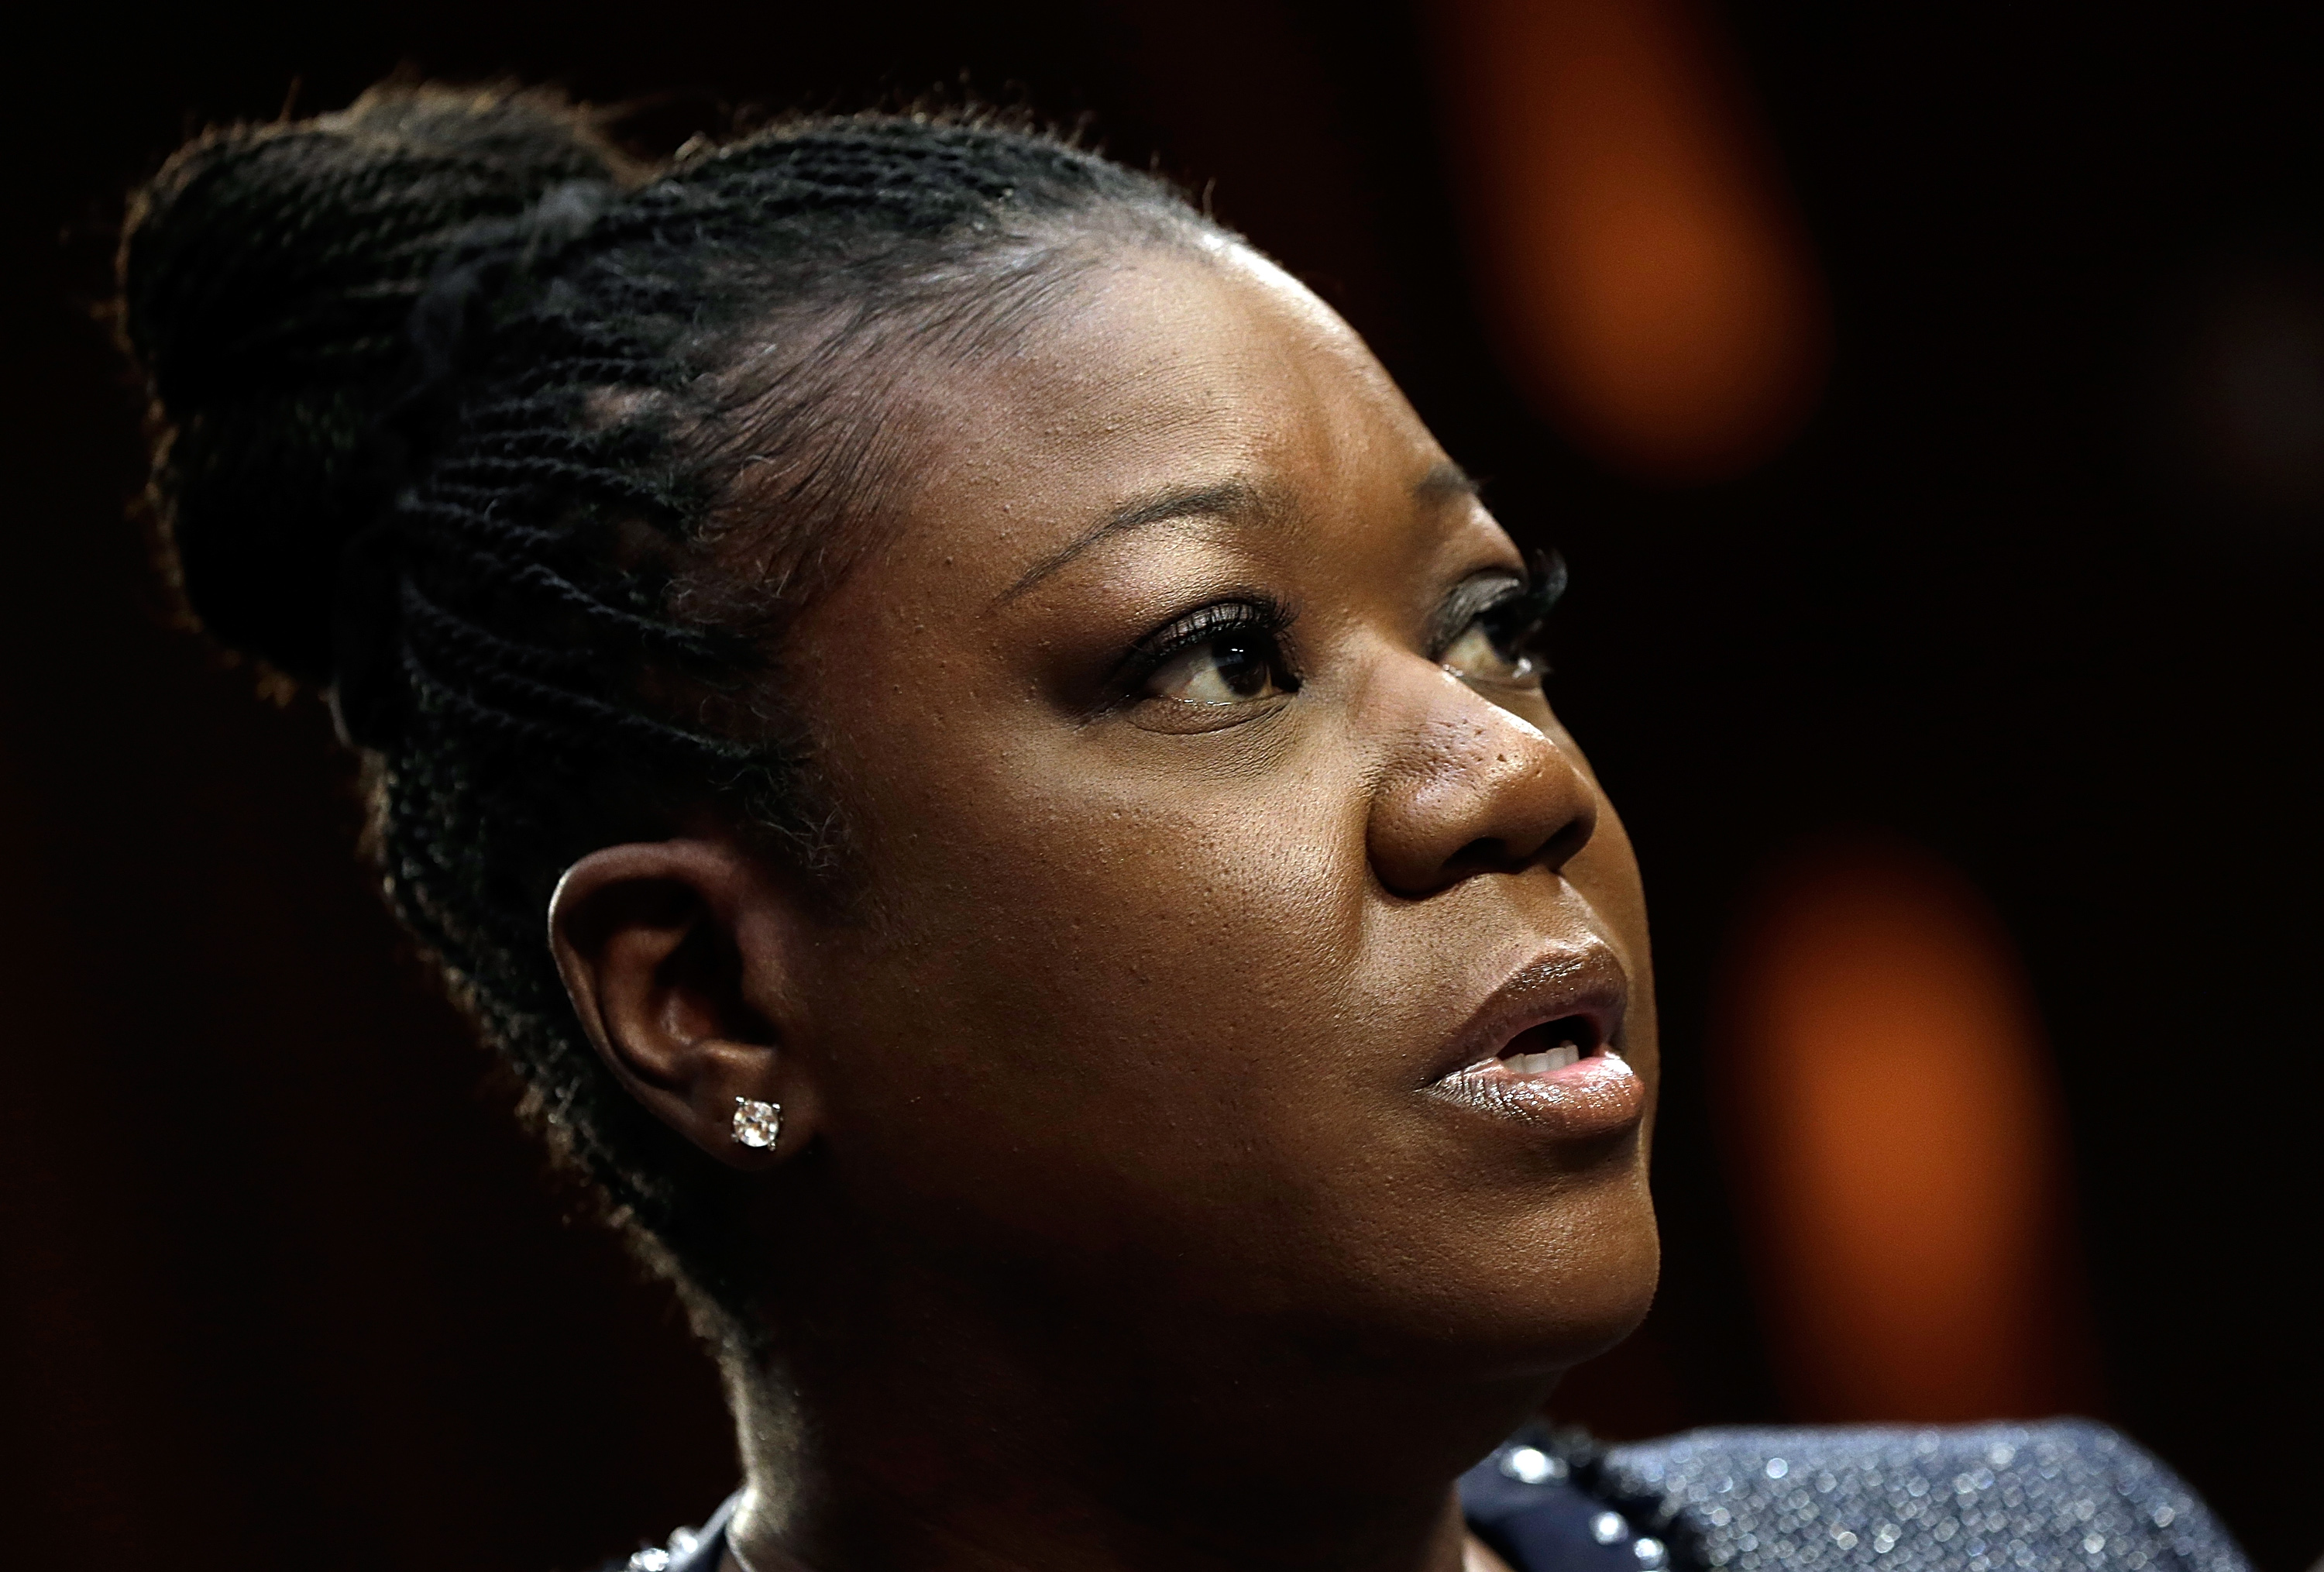 Sybrina Fulton of Miami, Fla., mother of Trayvon Martin, testifies during a Senate Judiciary Committee hearing on "Stand Your Ground" laws October 29, 2013 in Washington DC. (Win McNamee—Getty Images)